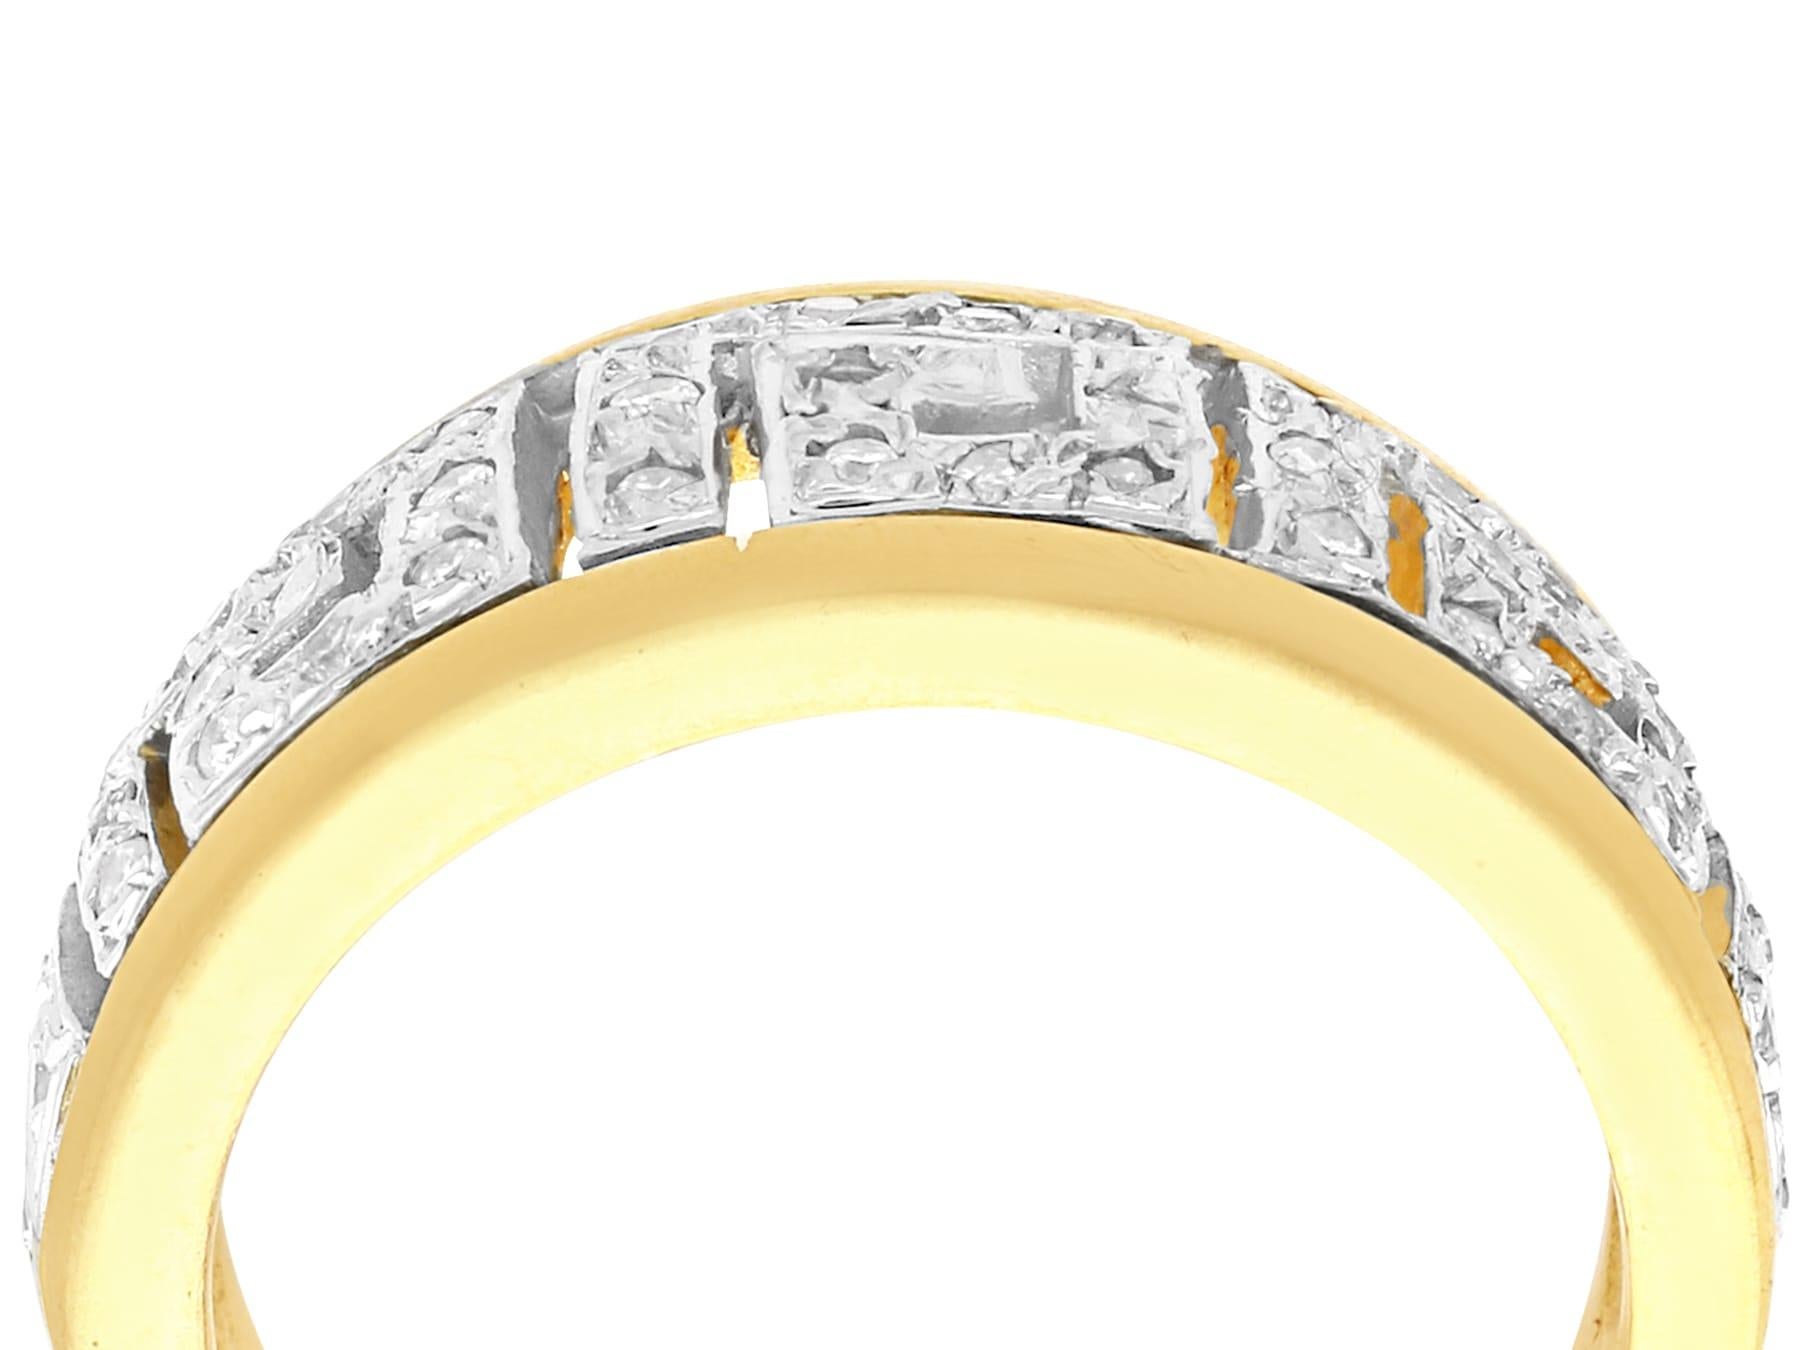 A fine 0.52 carat diamond and 18 karat yellow gold, 18 karat white gold set dress ring; part of our diverse contemporary jewelry collection.

This fine diamond band ring ring has been crafted in 18k yellow gold with an 18k white gold setting.

The